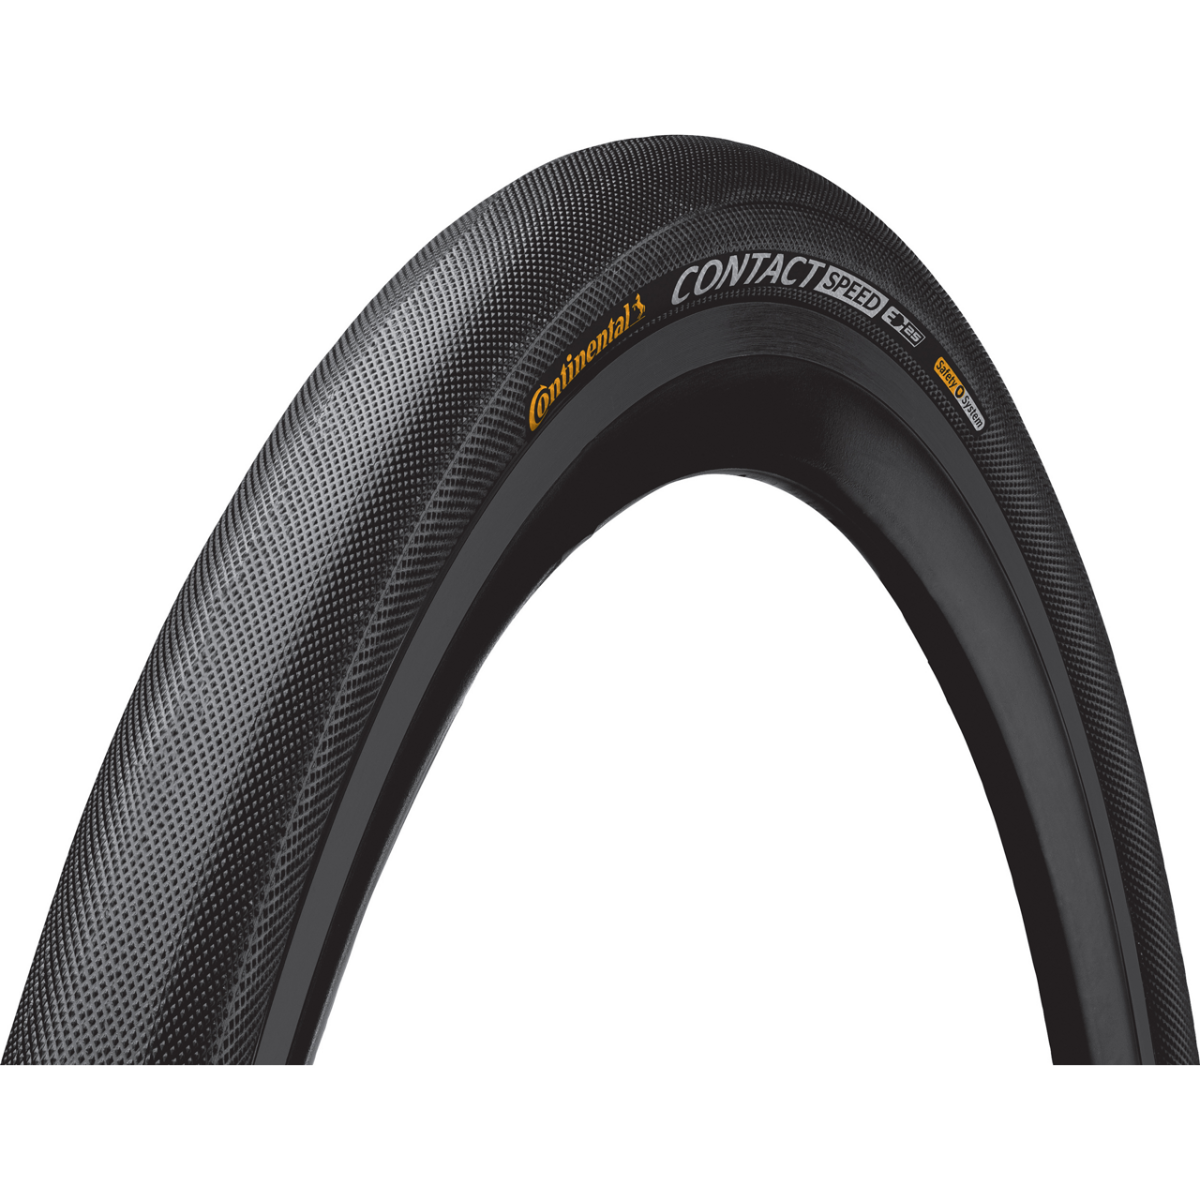 Bicycle tyre  Continental 42-622 Contact Speed black/black wire skin